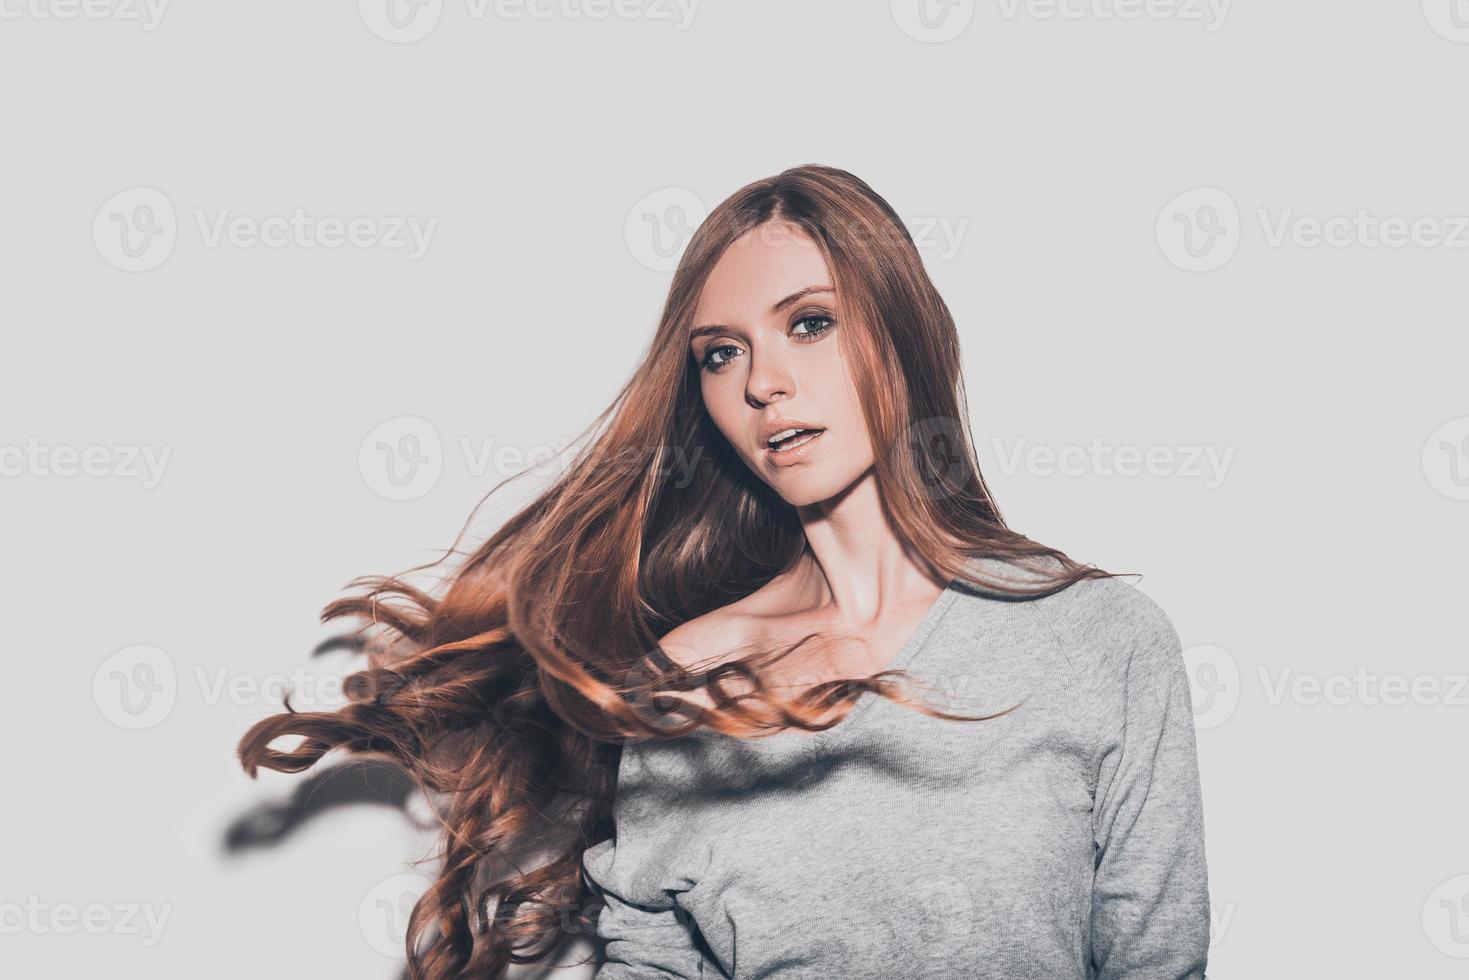 Hair in motion. Portrait of attractive young woman with tousled hair looking at camera while standing against grey background photo